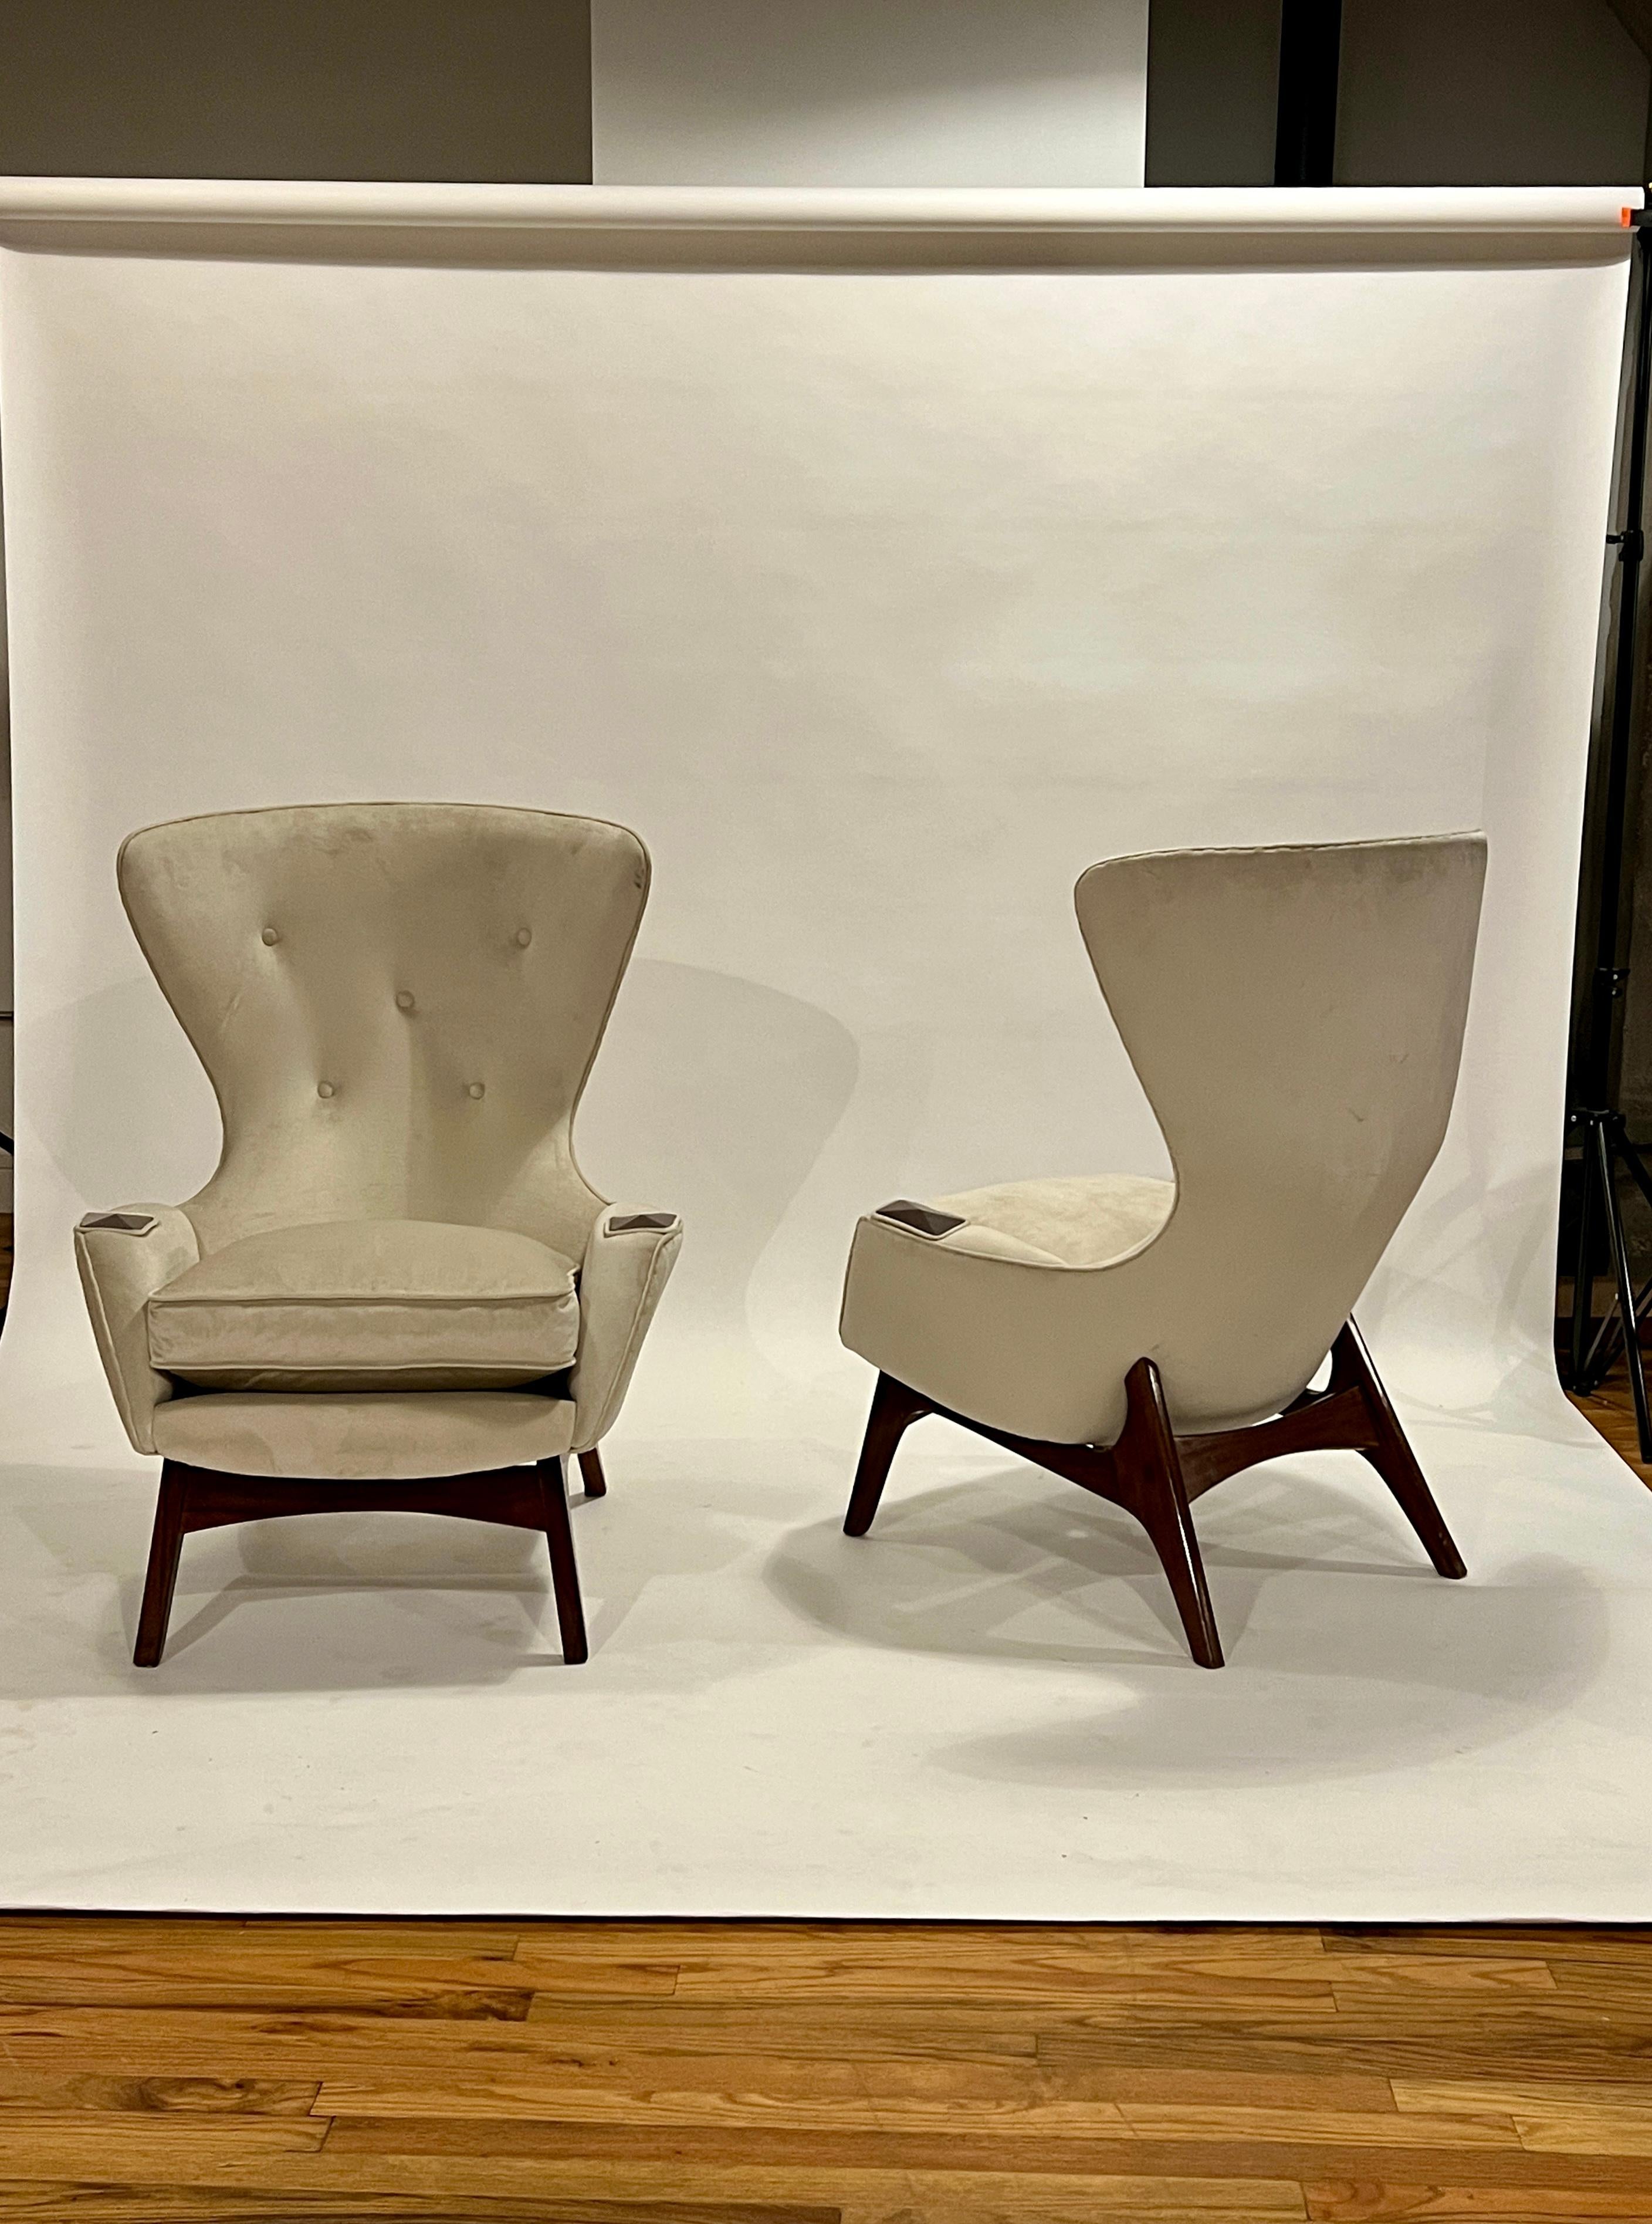 Pair of Adrian Pearsall wing chairs in beige velvet and dark walnut frame and accents. These chairs are sold as acquired and is in good vintage condition showing little wear but it's not the best upholstery job. We have sold several of these chairs